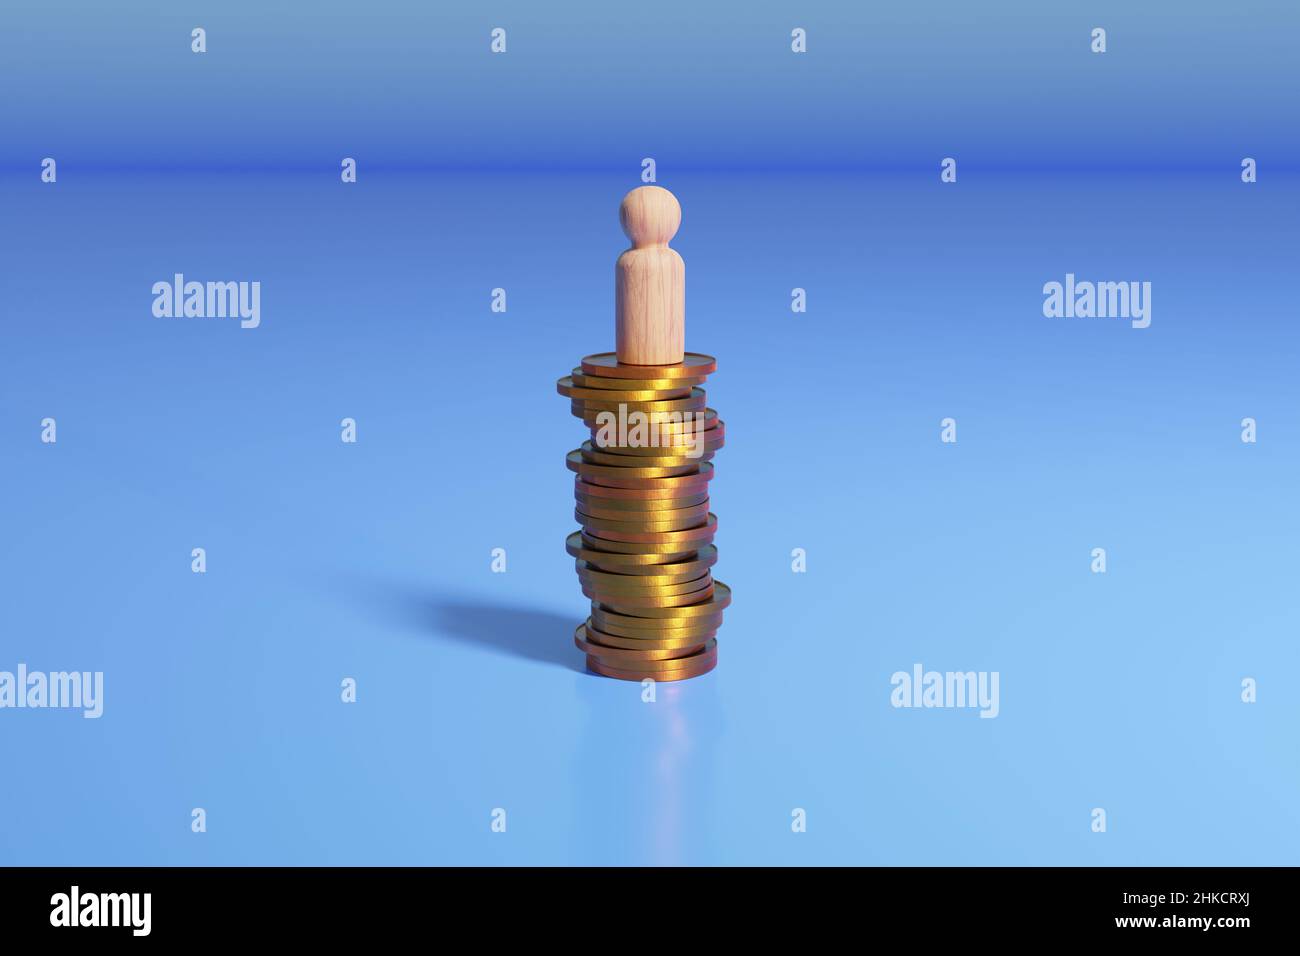 Wooden peg doll on stack of coins. Financial success concept. Stock Photo